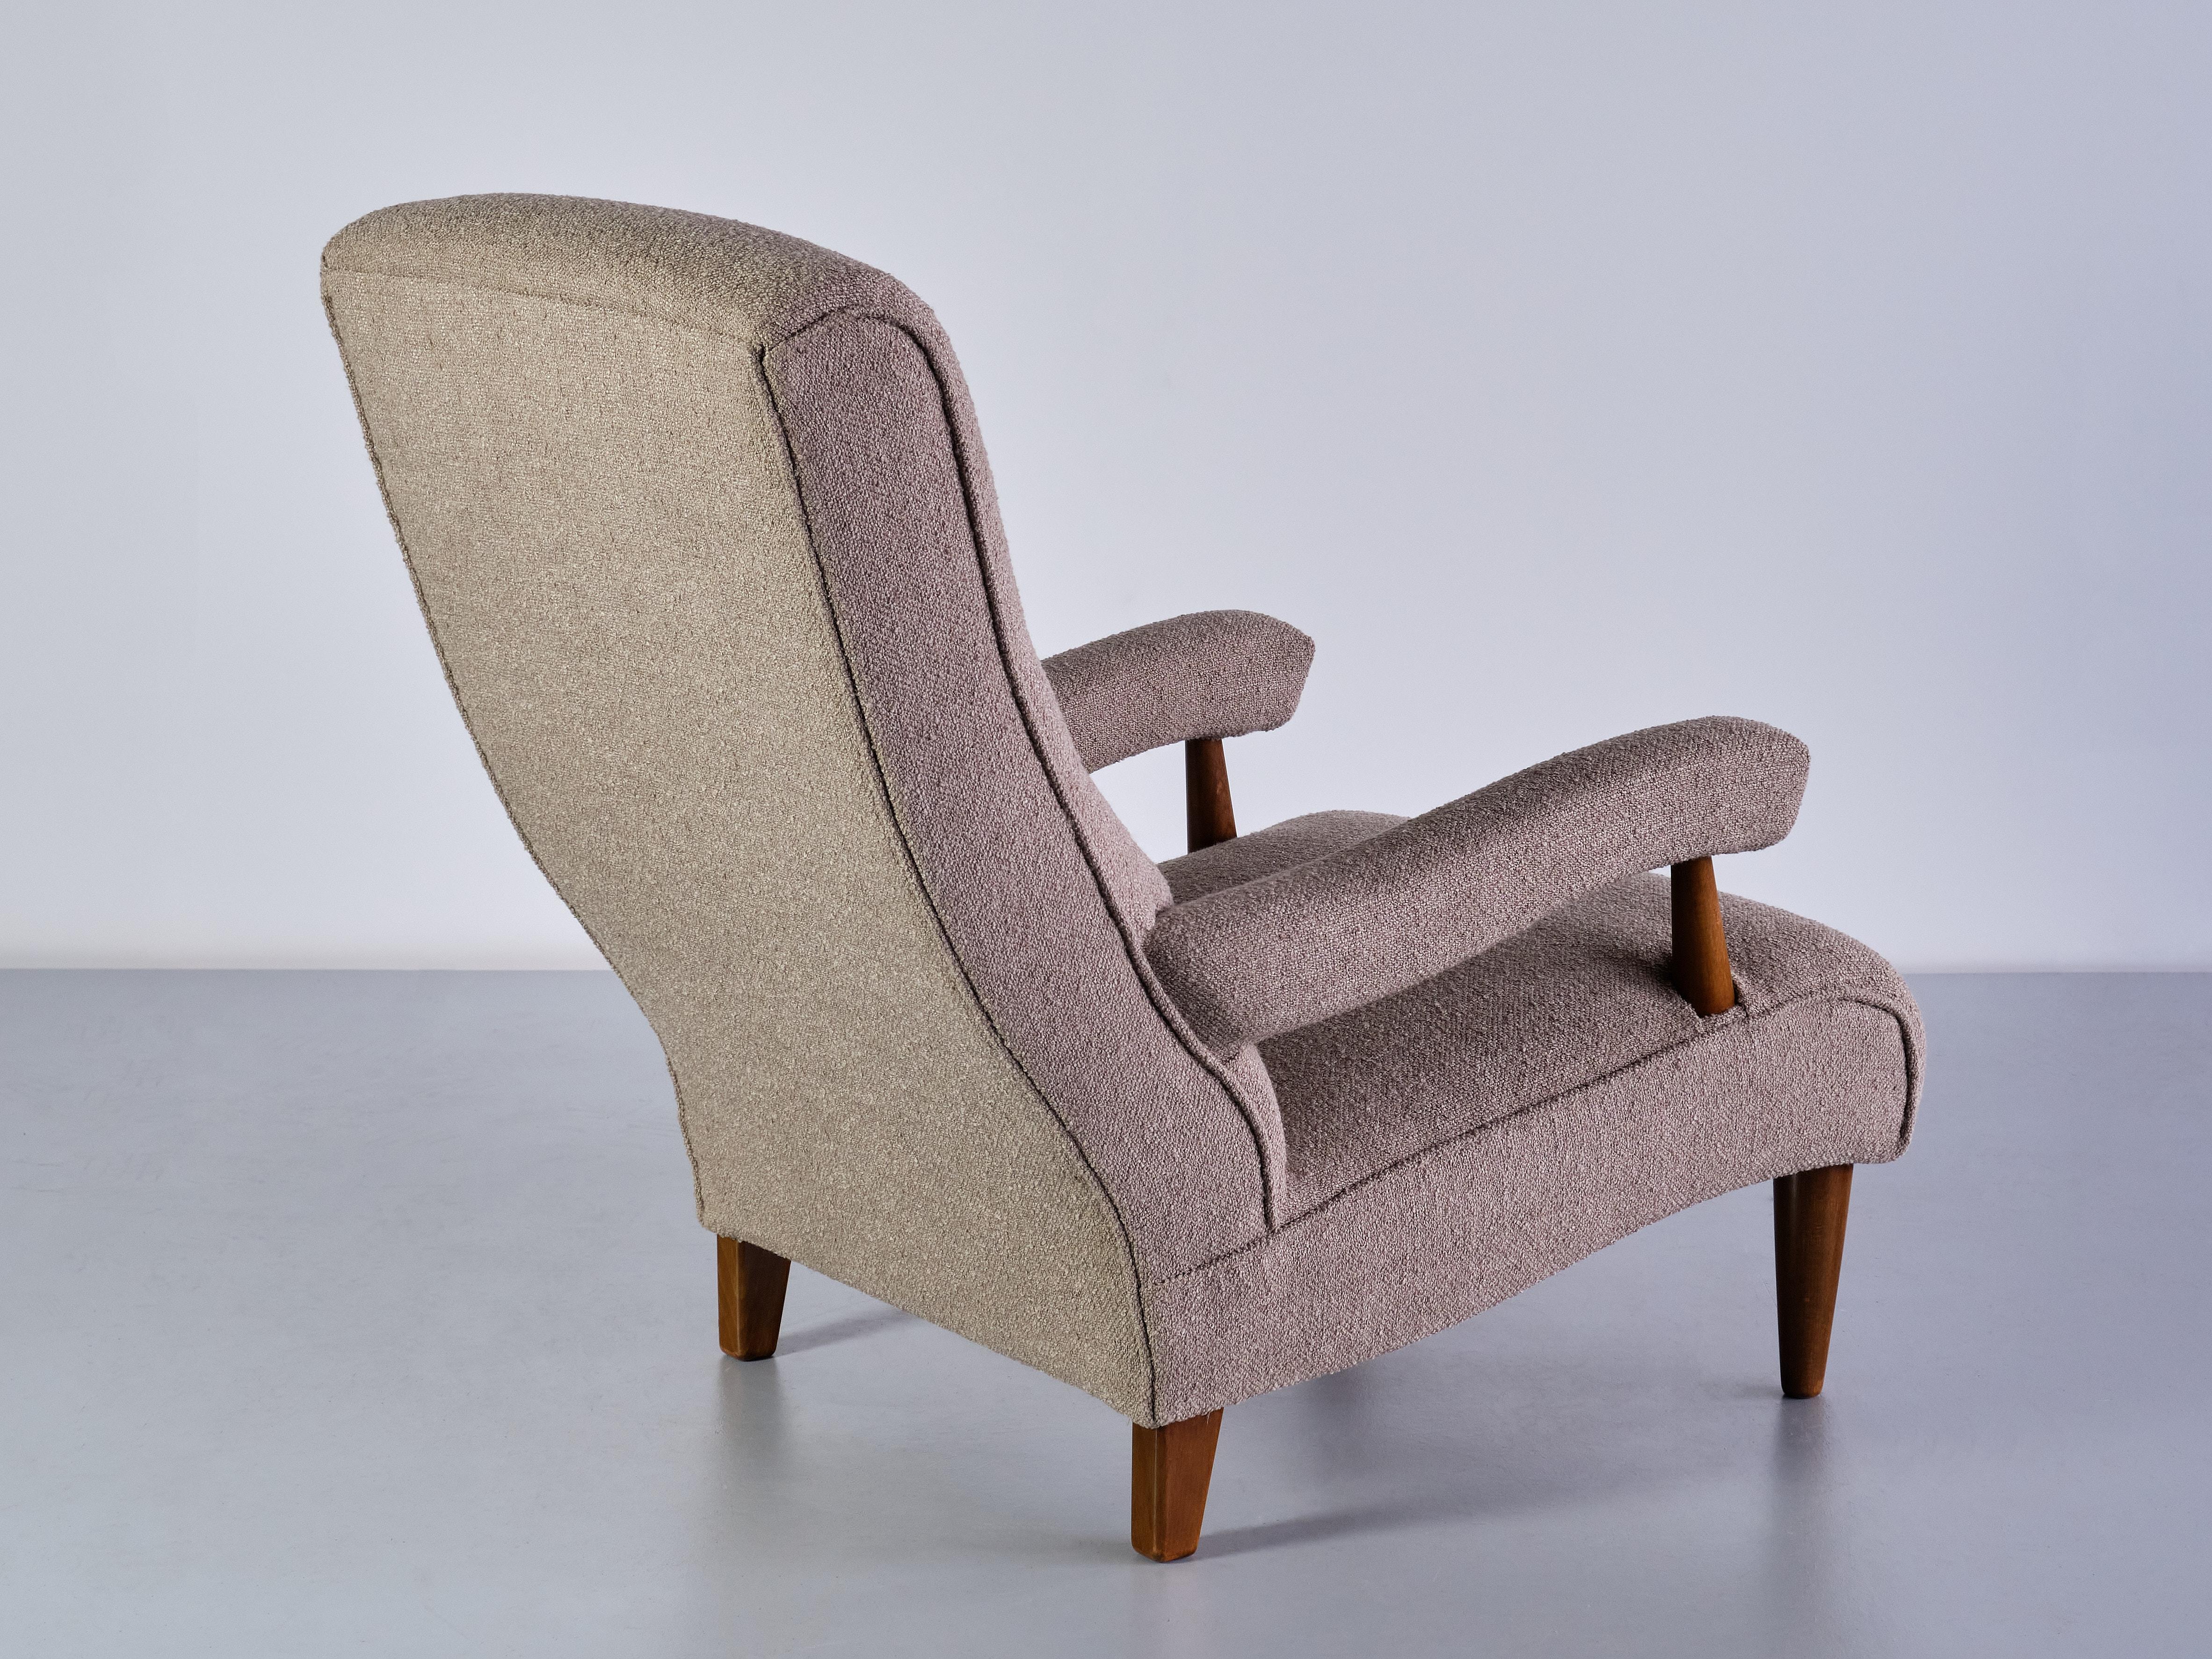 Upholstery Tage Westberg Armchair in Bouclé and Beech Wood, Sweden, 1960s For Sale